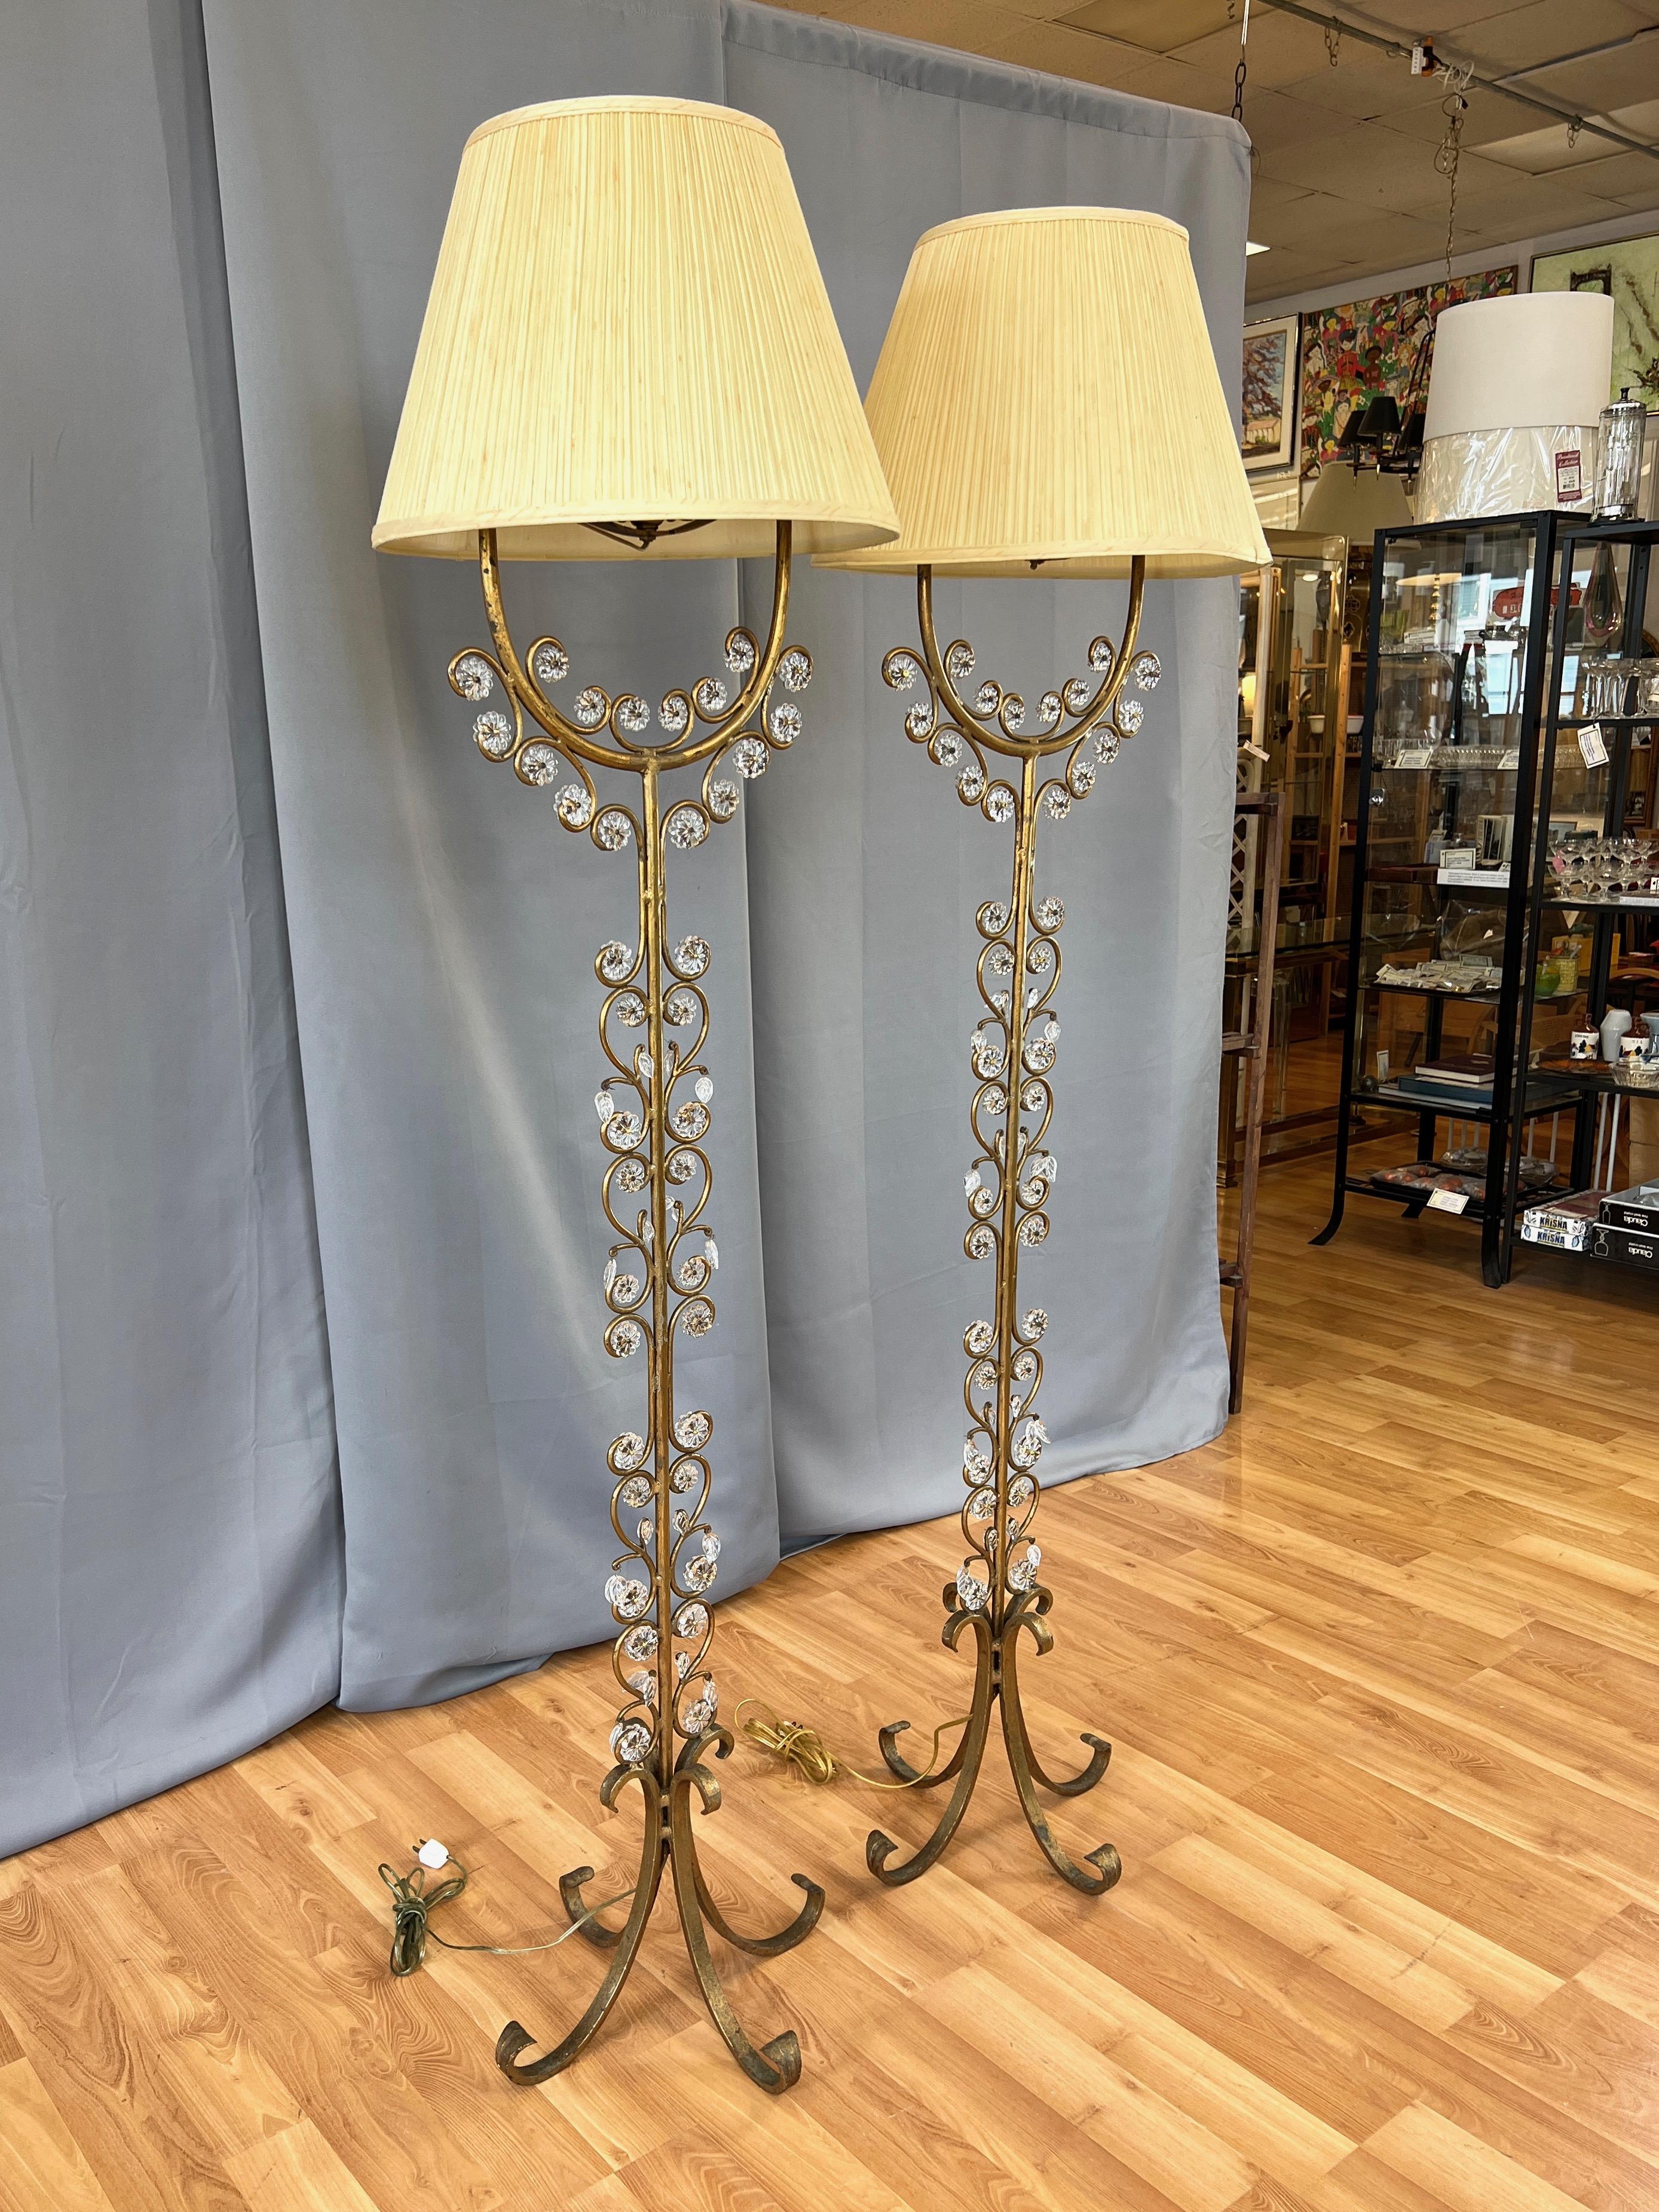 Hollywood Regency Pair of Italian Gilt Wrought Iron Floor Lamps with Glass Florets & Leaves, 1950s For Sale